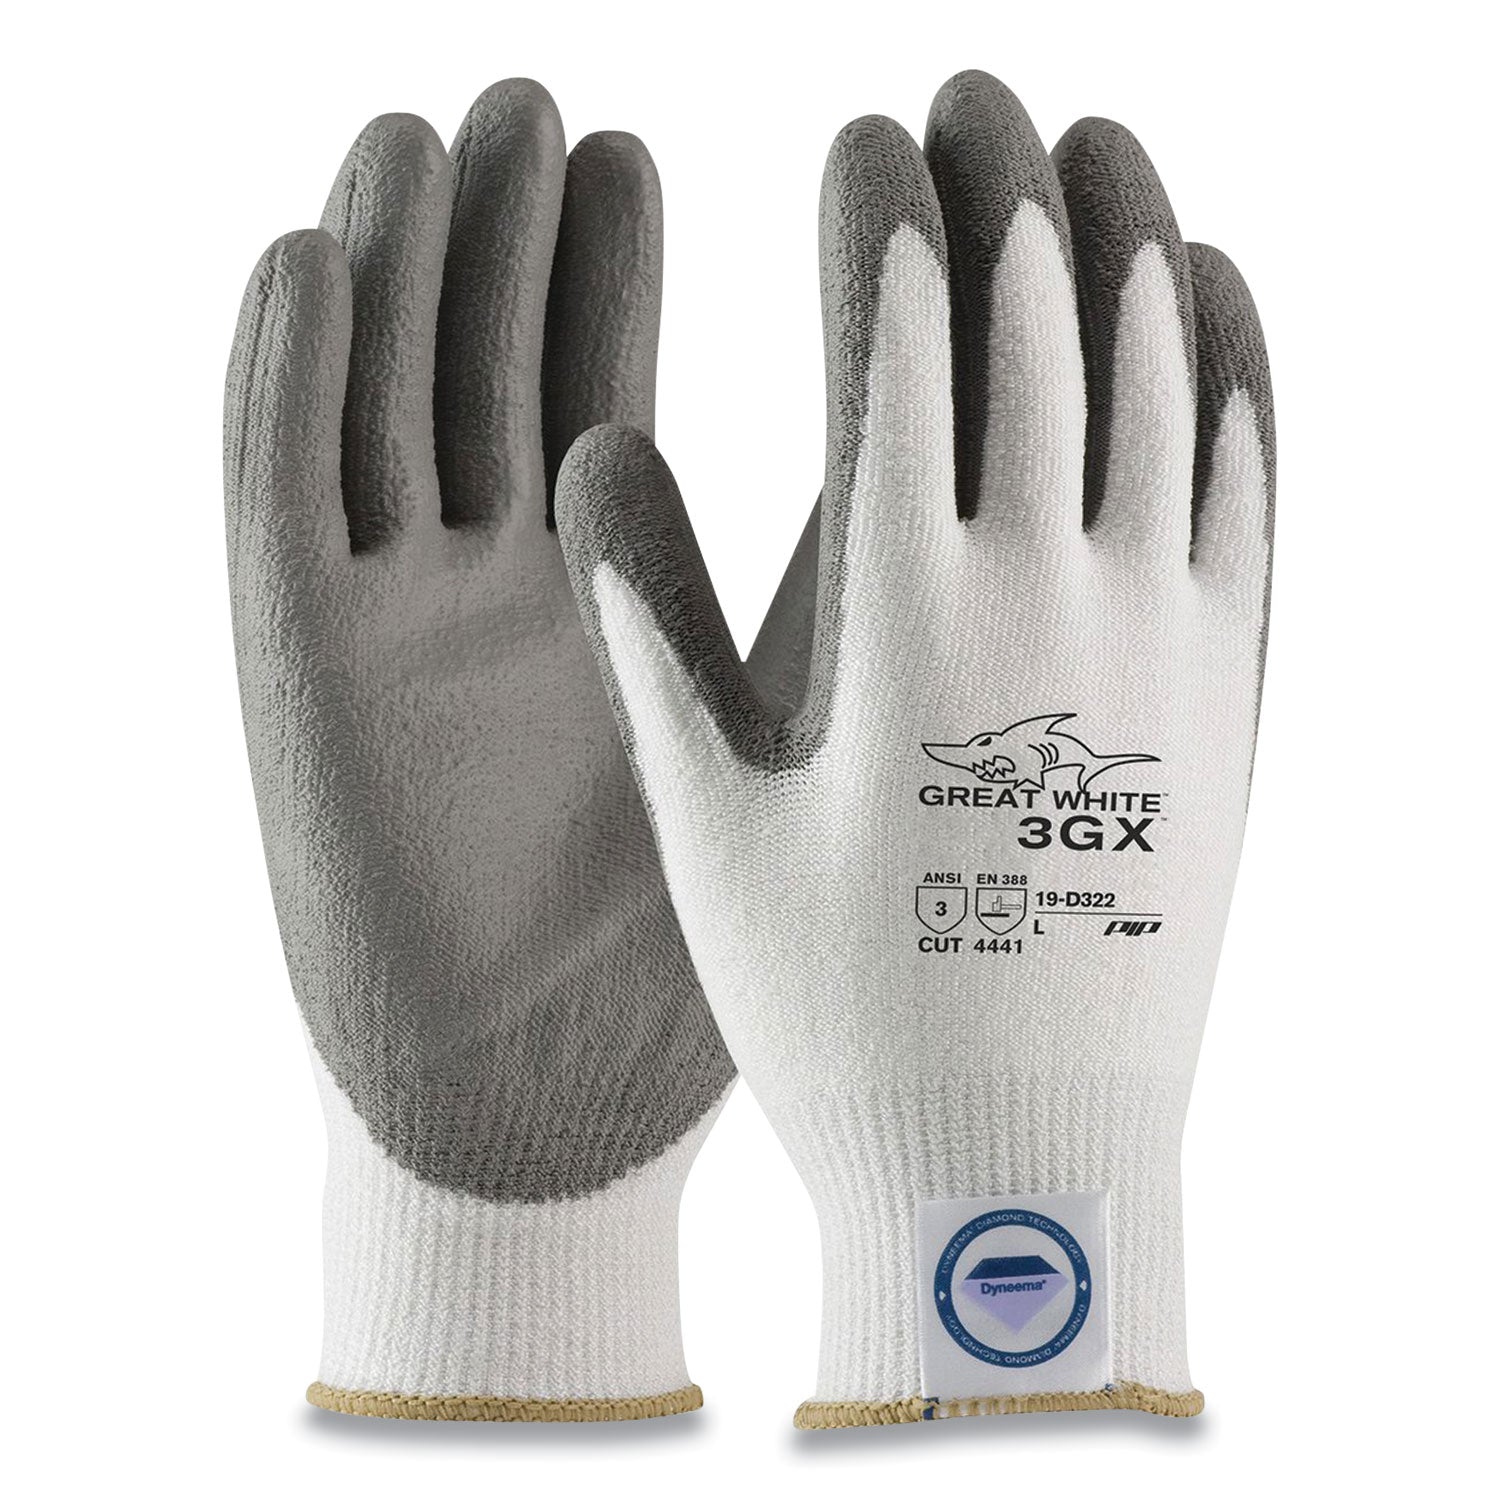 great-white-3gx-seamless-knit-dyneema-diamond-blended-gloves-small-white-gray_pid19d322s - 2